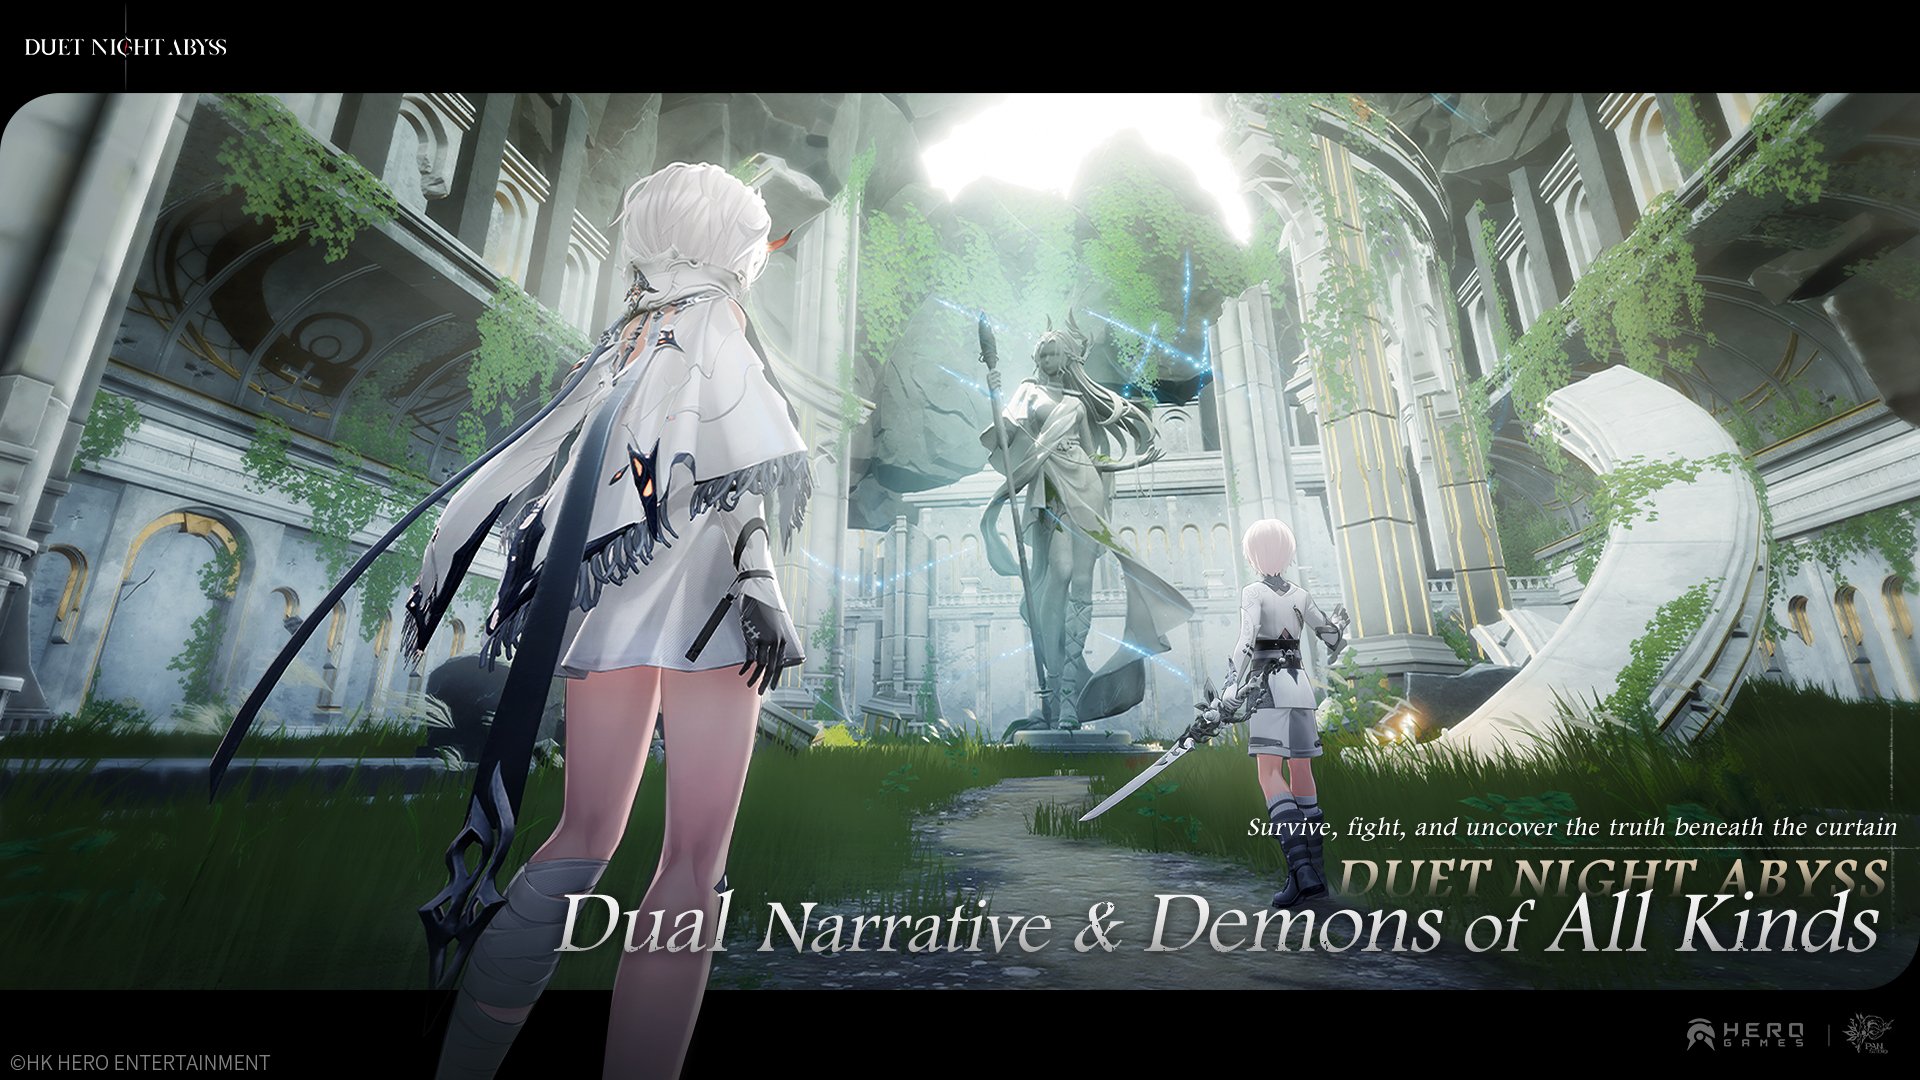 duet night abyss: Duet Night Abyss: Check out what we know about upcoming  anime game's release date, gameplay, trailer, platforms and more - The  Economic Times